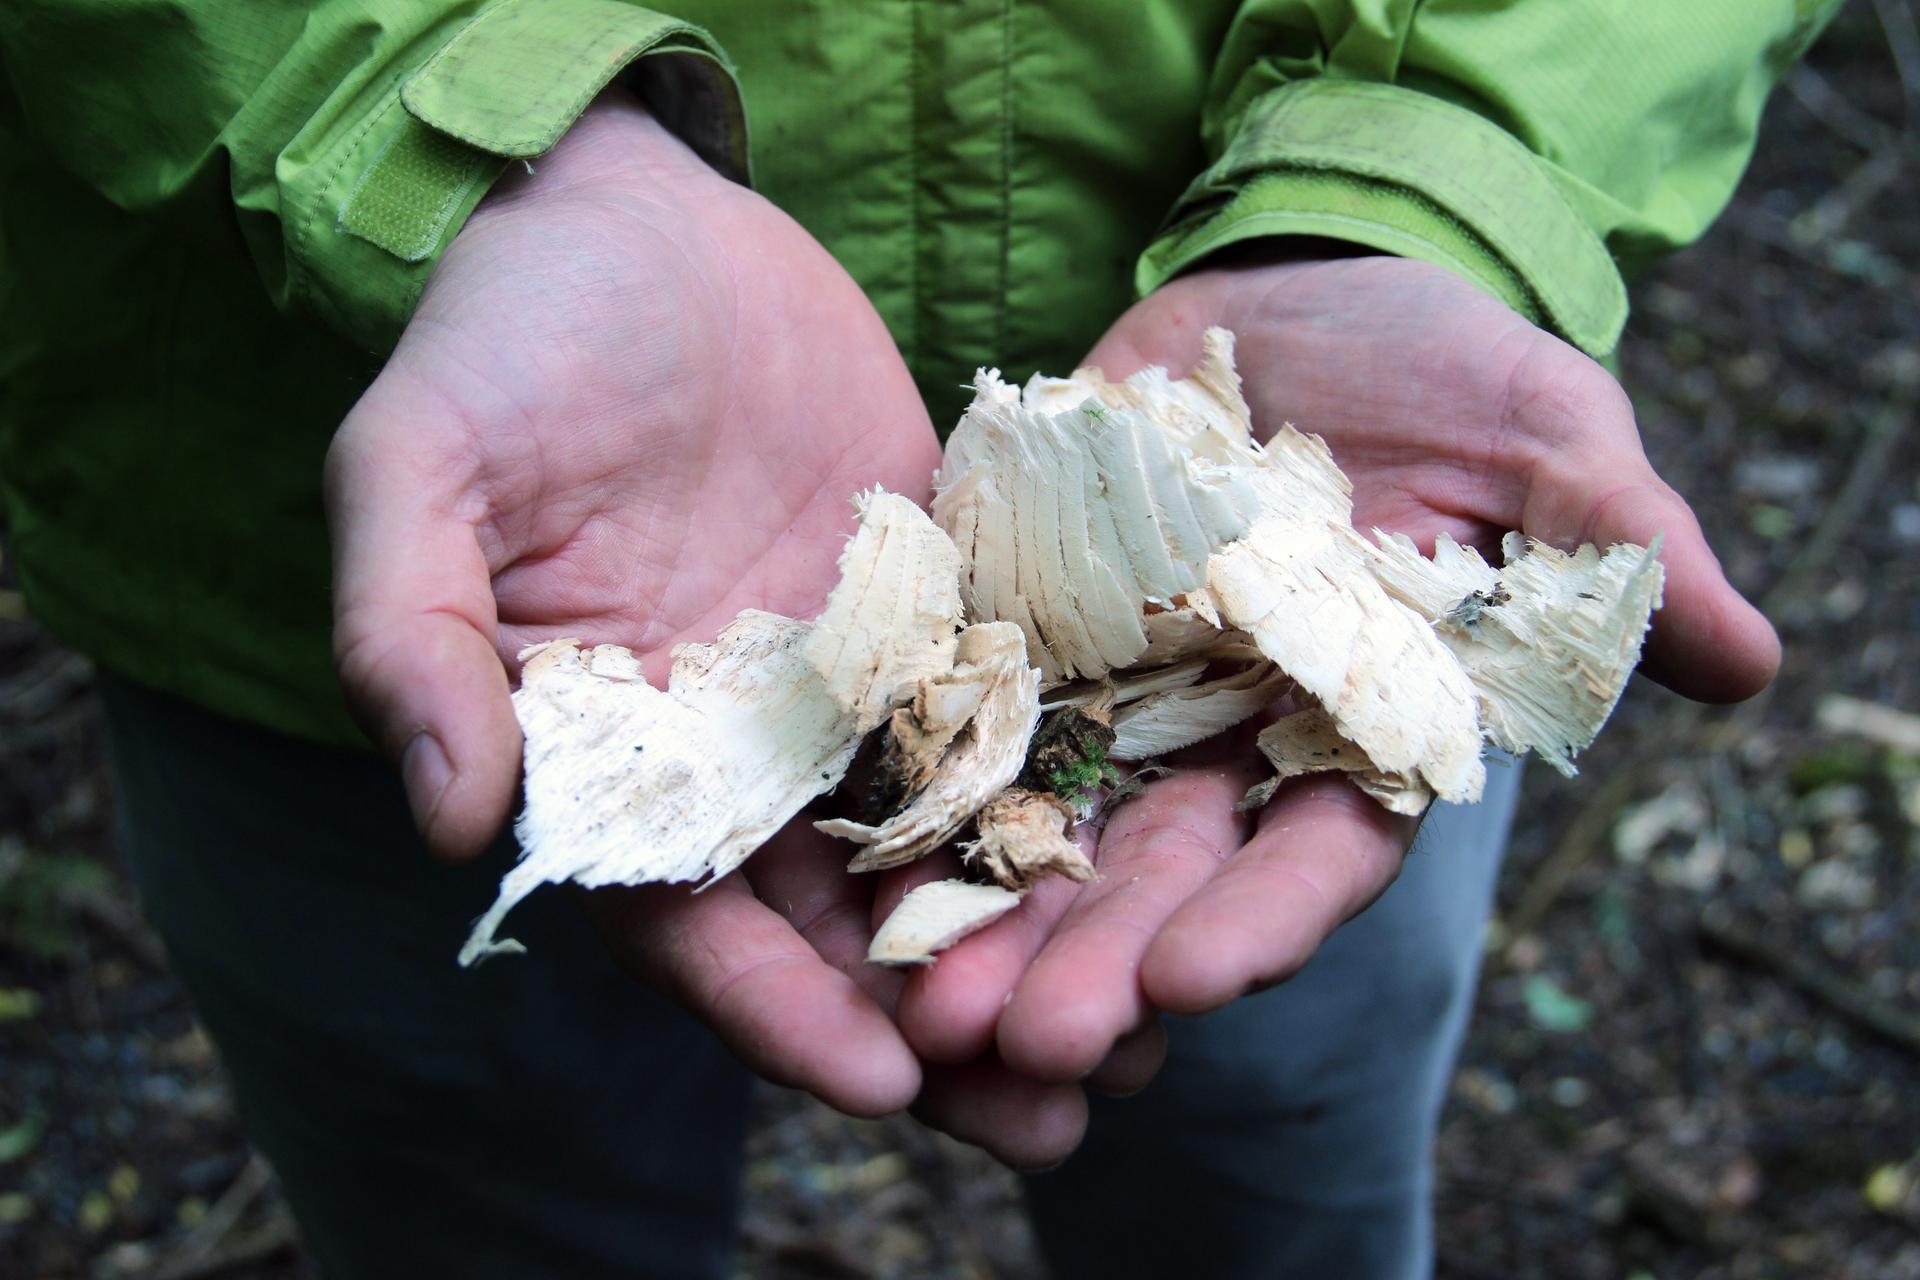 Vancouver biologist Nick Page holding tree shavings from beaver activity.